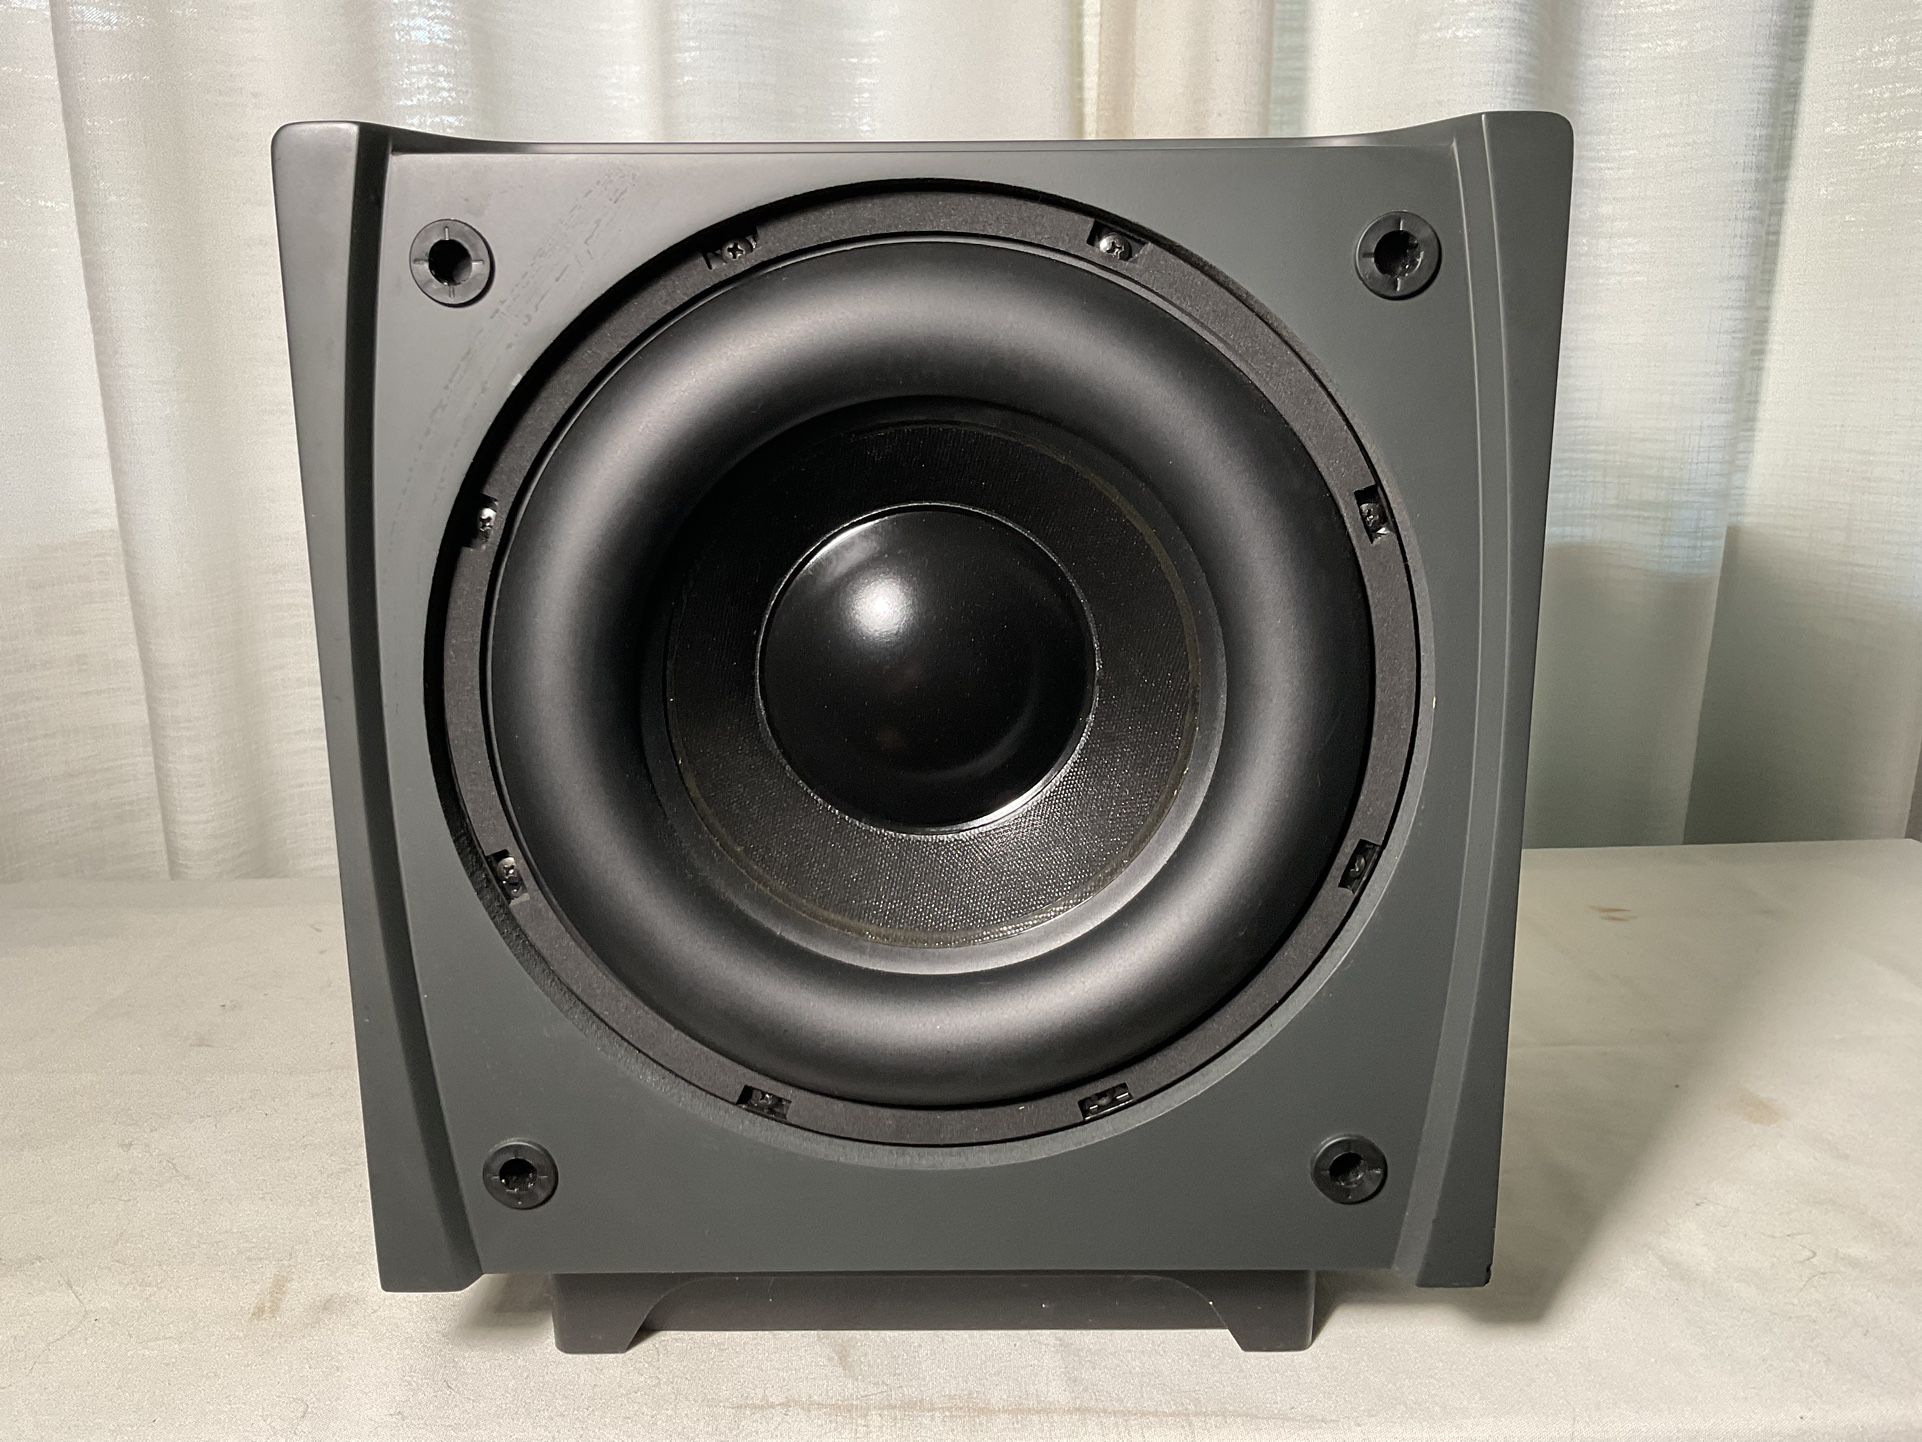 Cambridge Sound works Subwoofer P200 Compact 10 Inch 200 Watts 